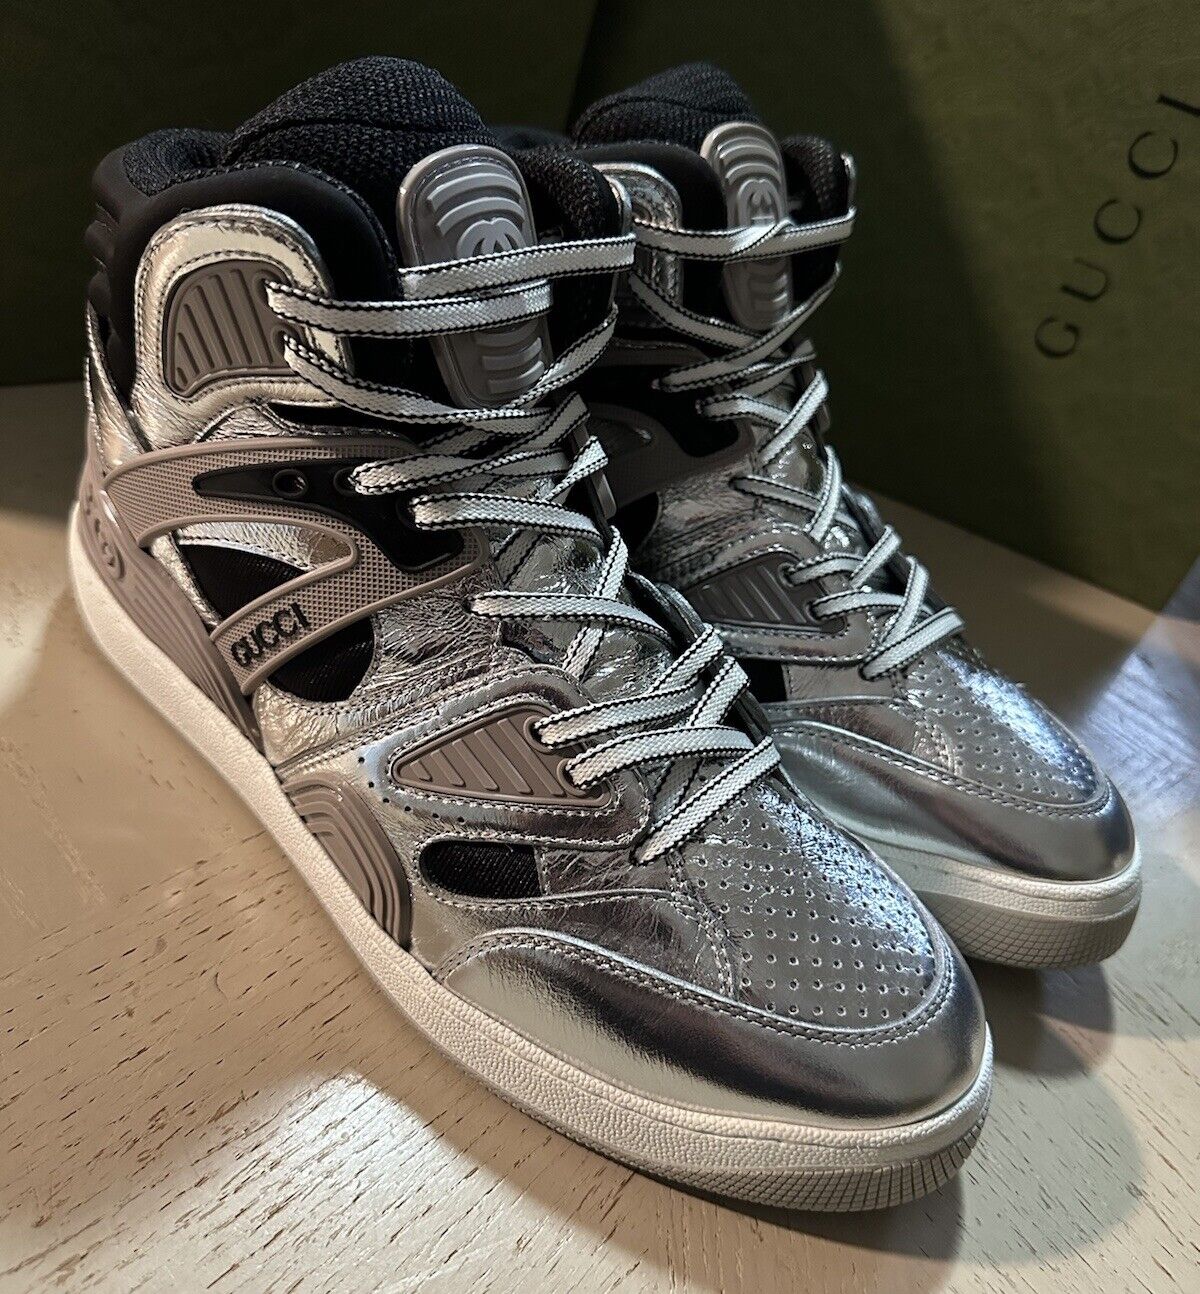 New $1195 Gucci Men High Top Sneakers Silver/Black 10 US/9.5 UK 724005